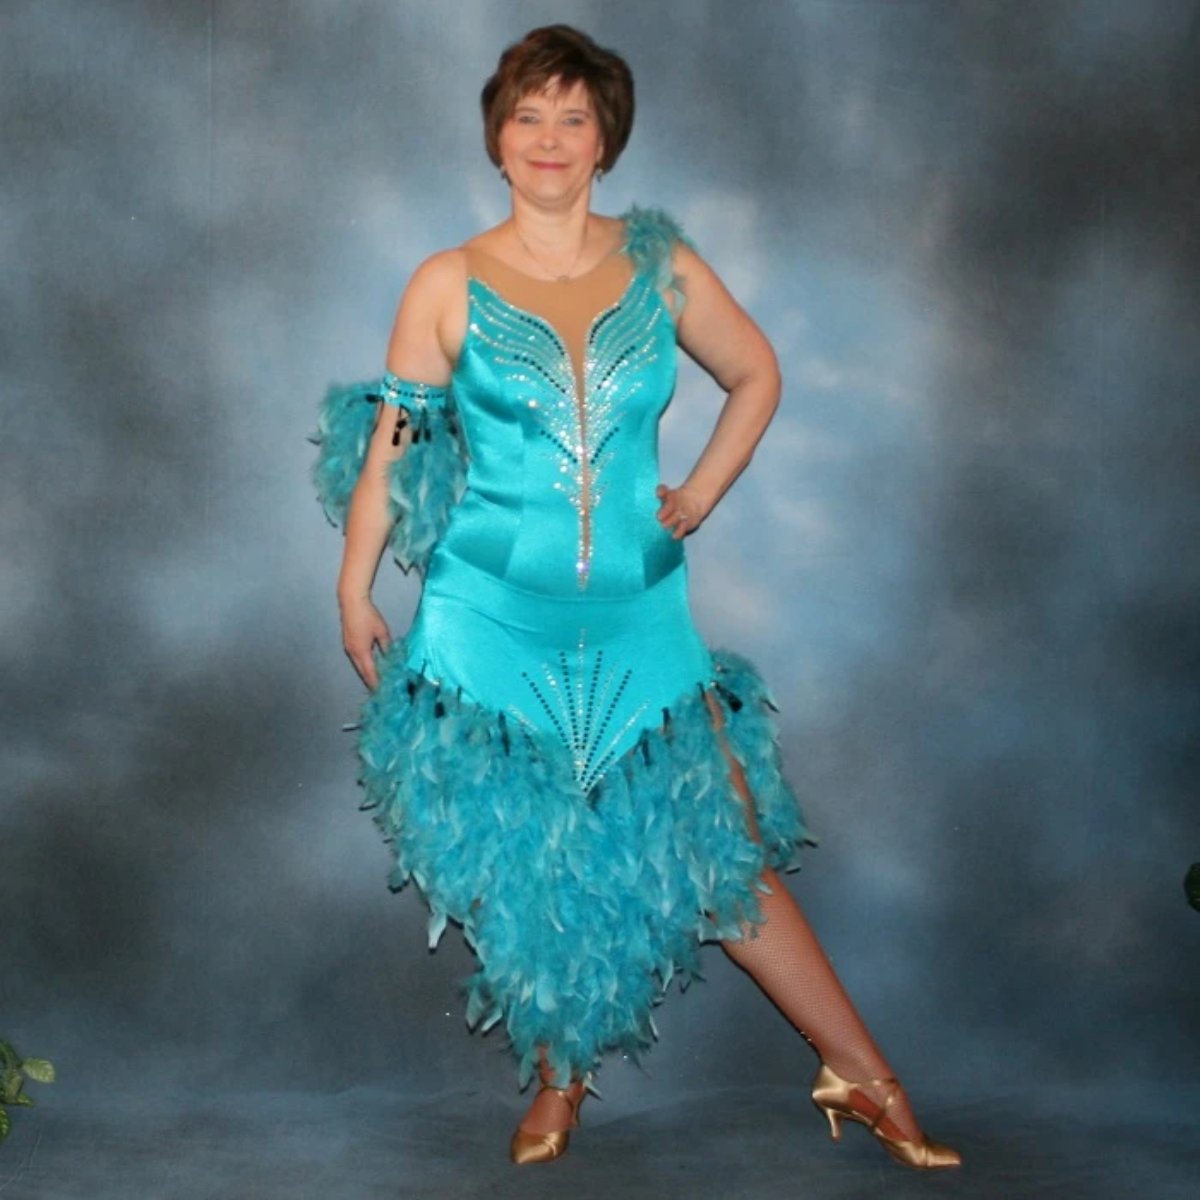 Turquoise Latin/rhythm dance dress created in turquoise lycra on nude illusion, is embellished with crystal and jet black Swarovski rhinestones, with chandelle feathers and black spangles. The v styled skirt slits up high on both sides. Matching arm bands complete the look.